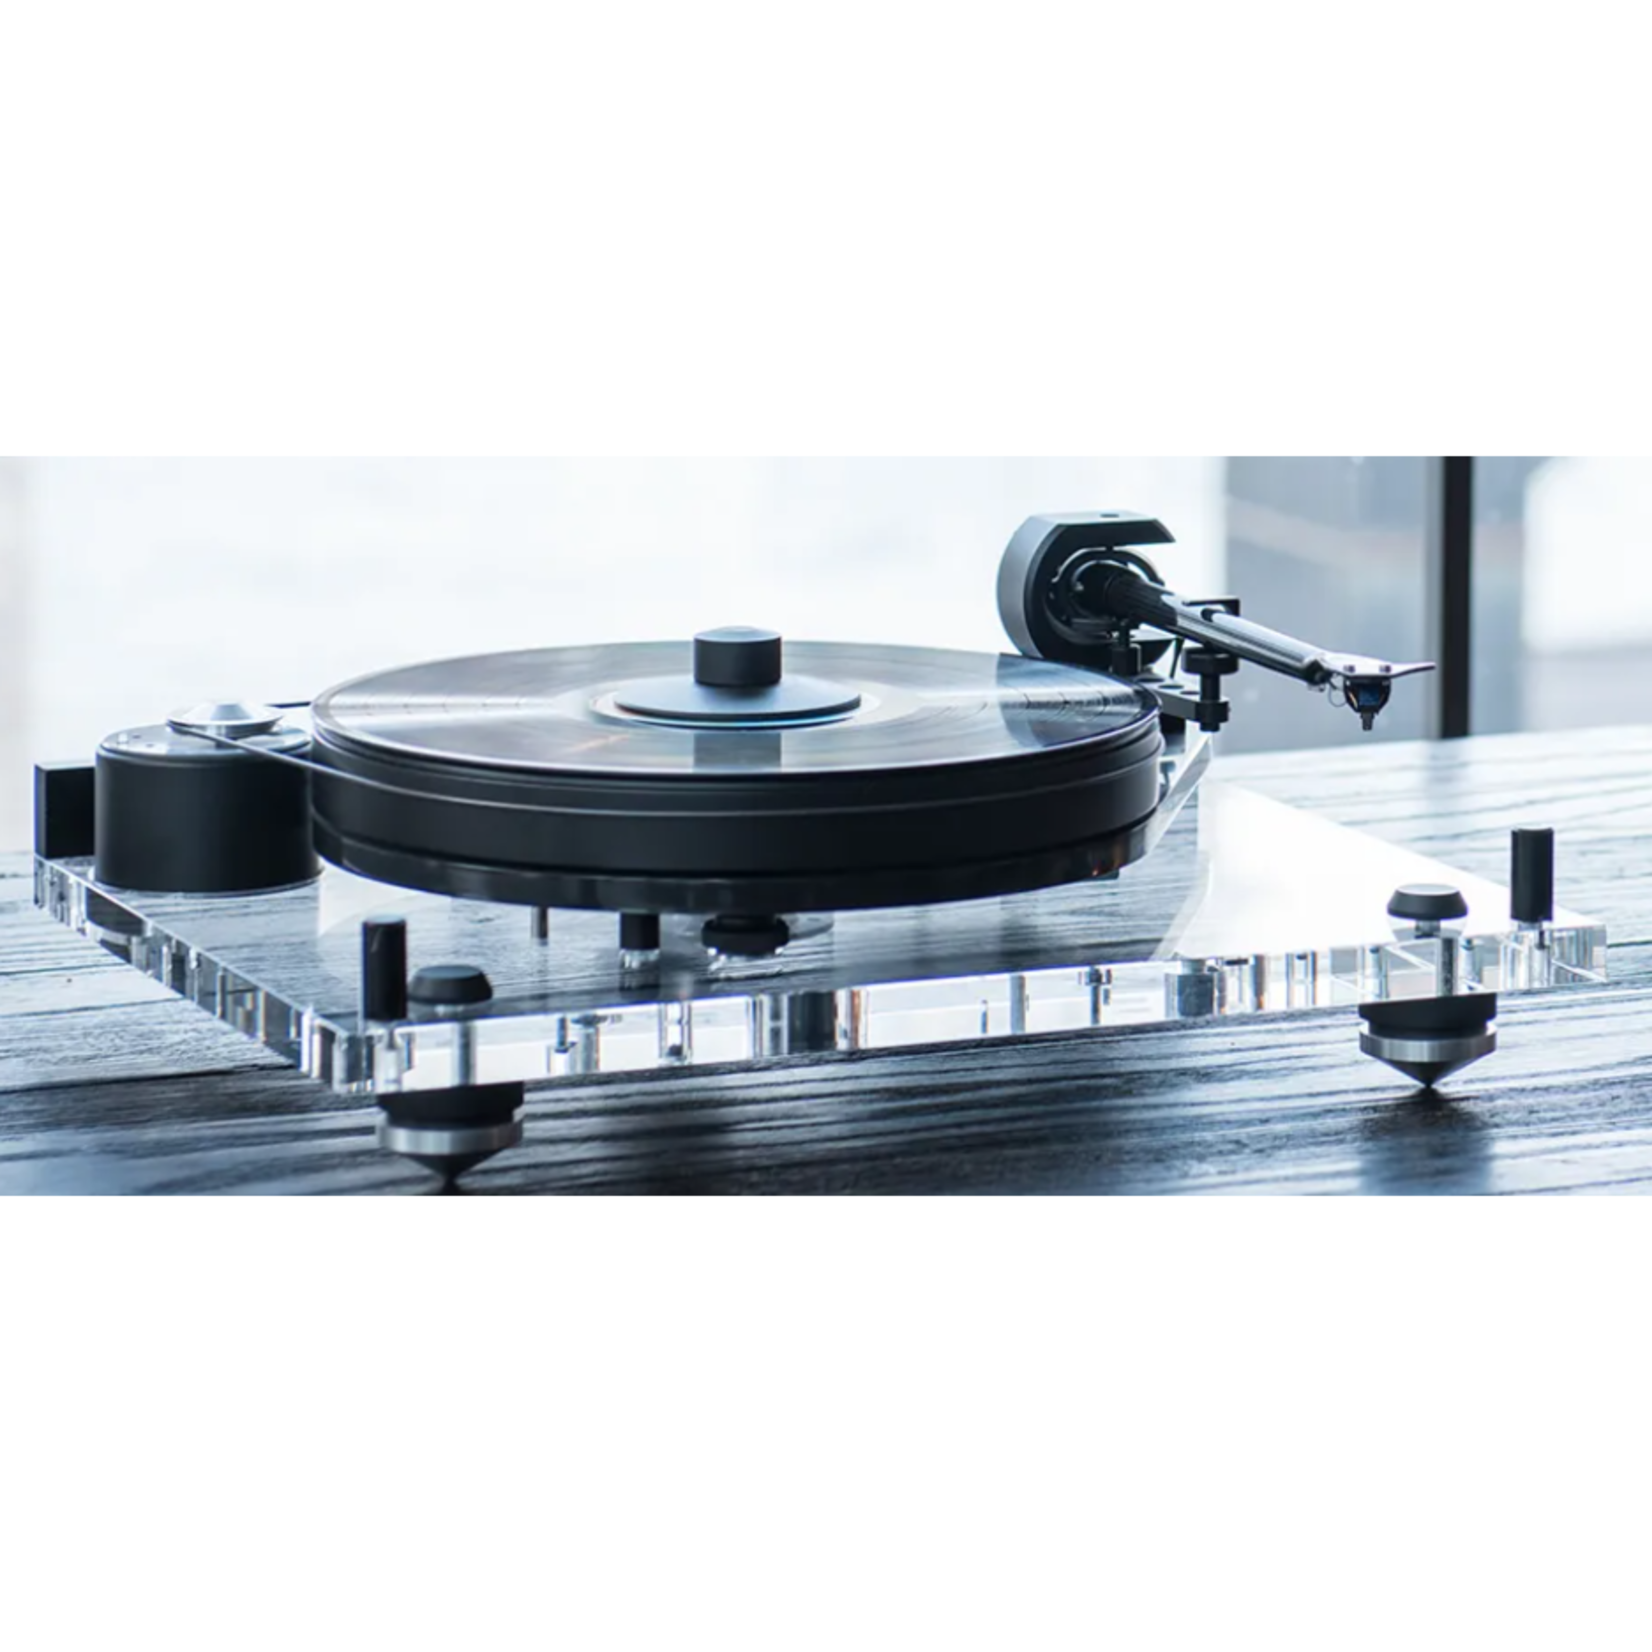 Pro-Ject Pro-ject 6 PerspeX SB turntable with Ortofon Quintet Blue Cartridge